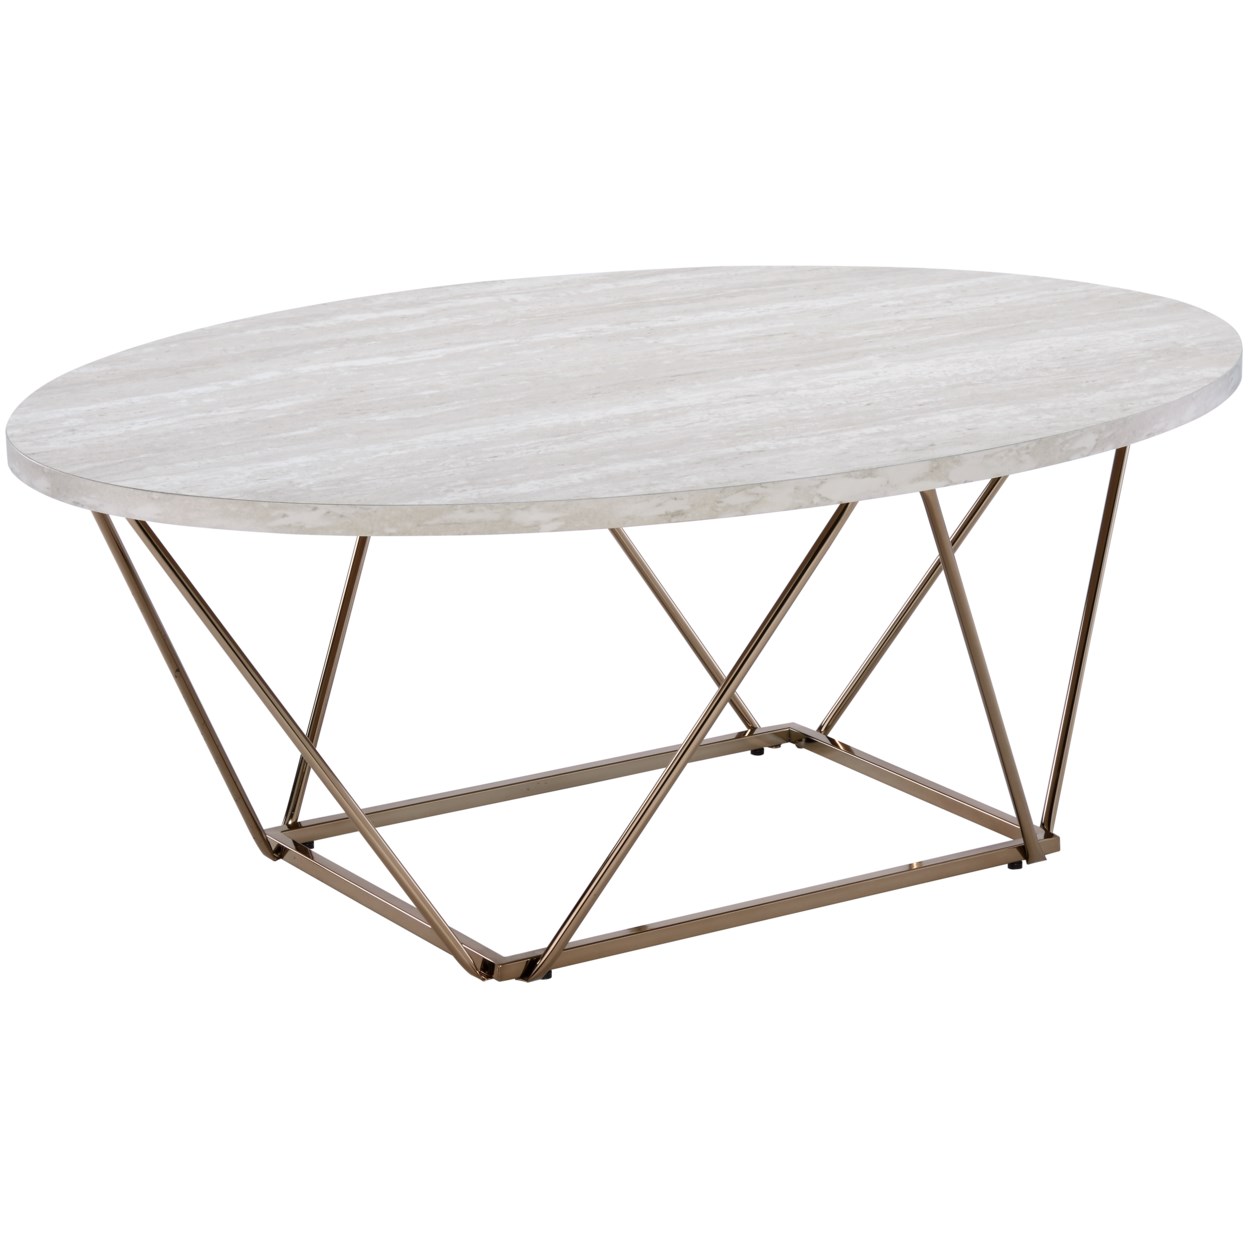 Steve Silver Rowyn Faux Marble Top Cocktail Table